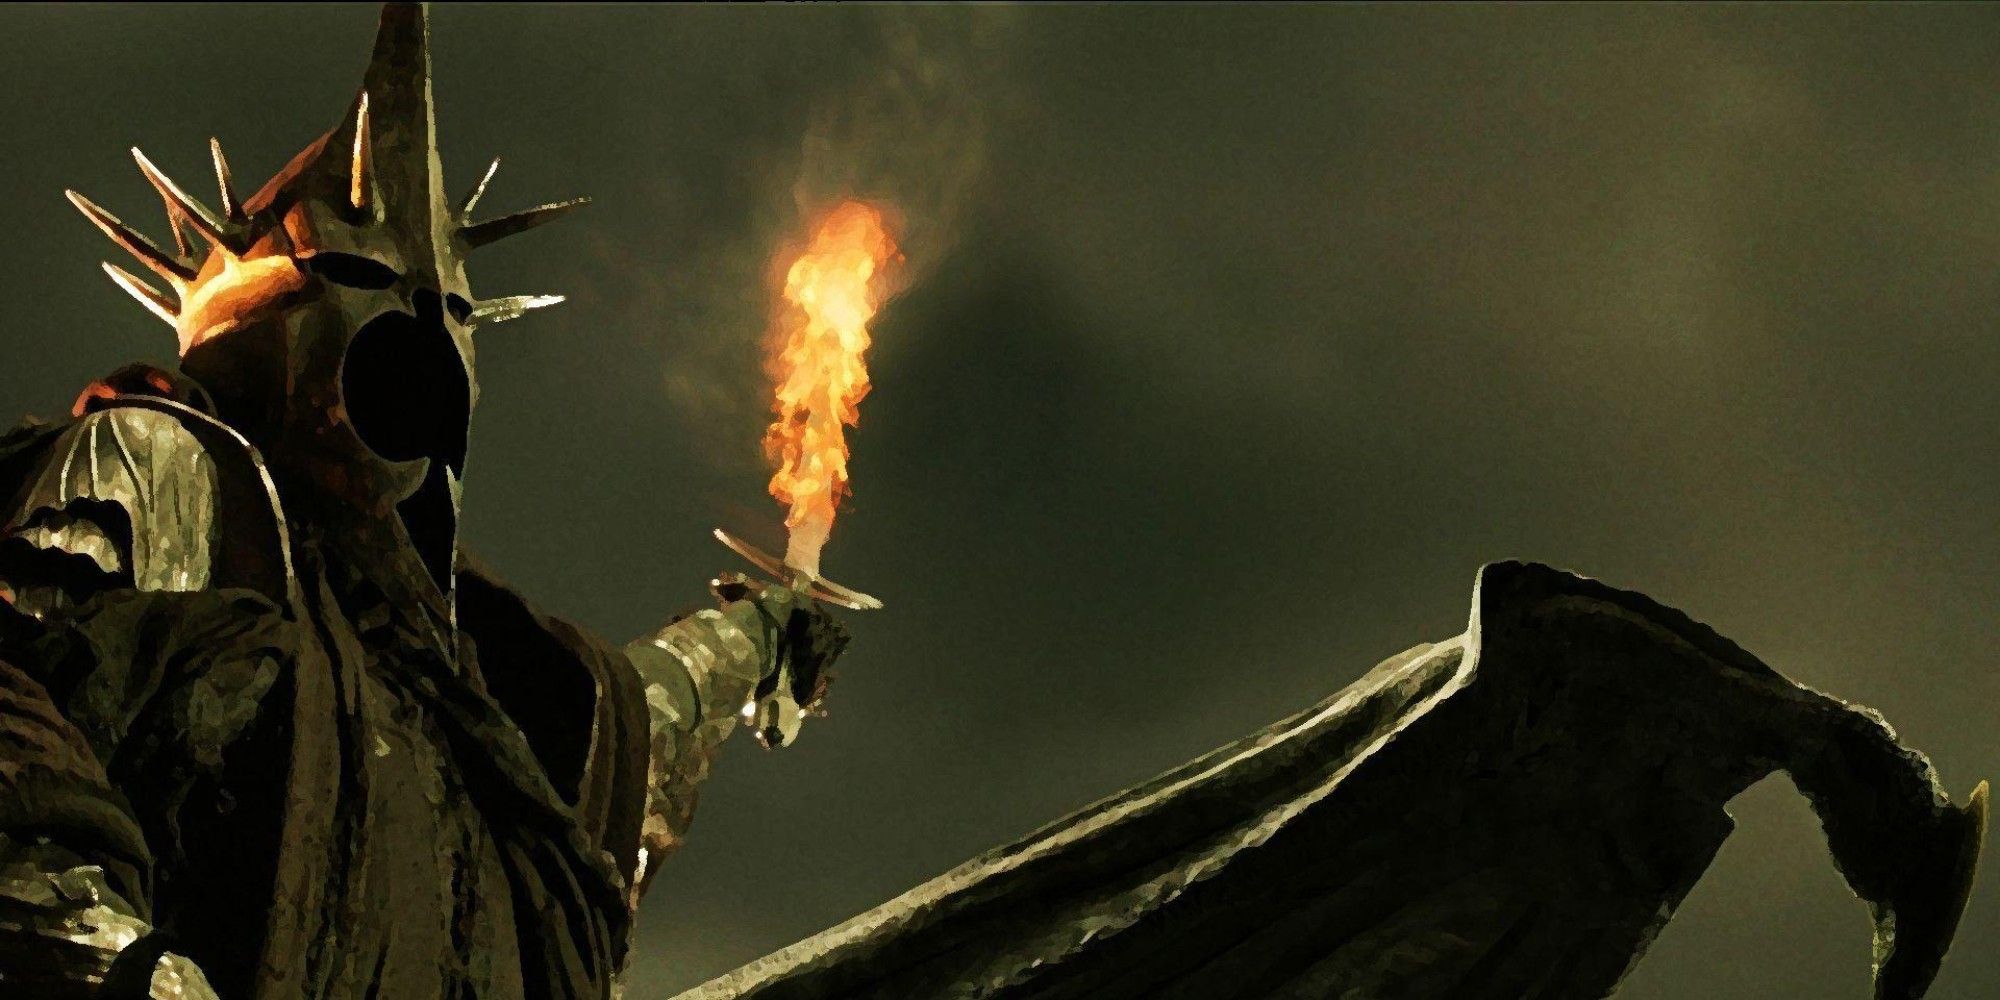 witch-king flaming sword in lotr